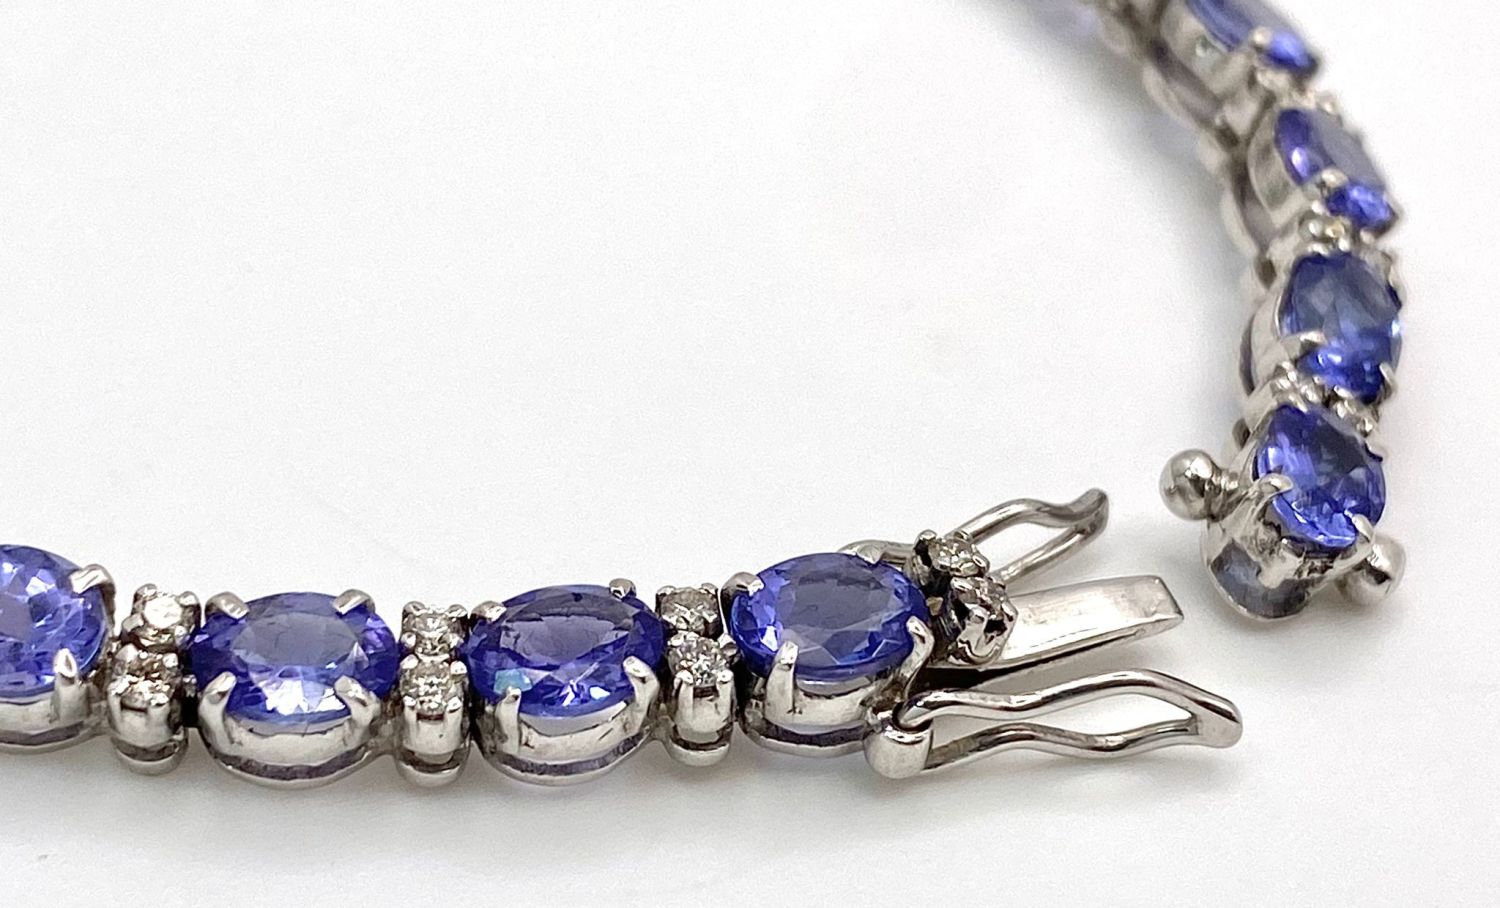 A spectacular 18 K white gold bracelet with oval cut tanzanite gems and round cut diamonds. - Image 9 of 16